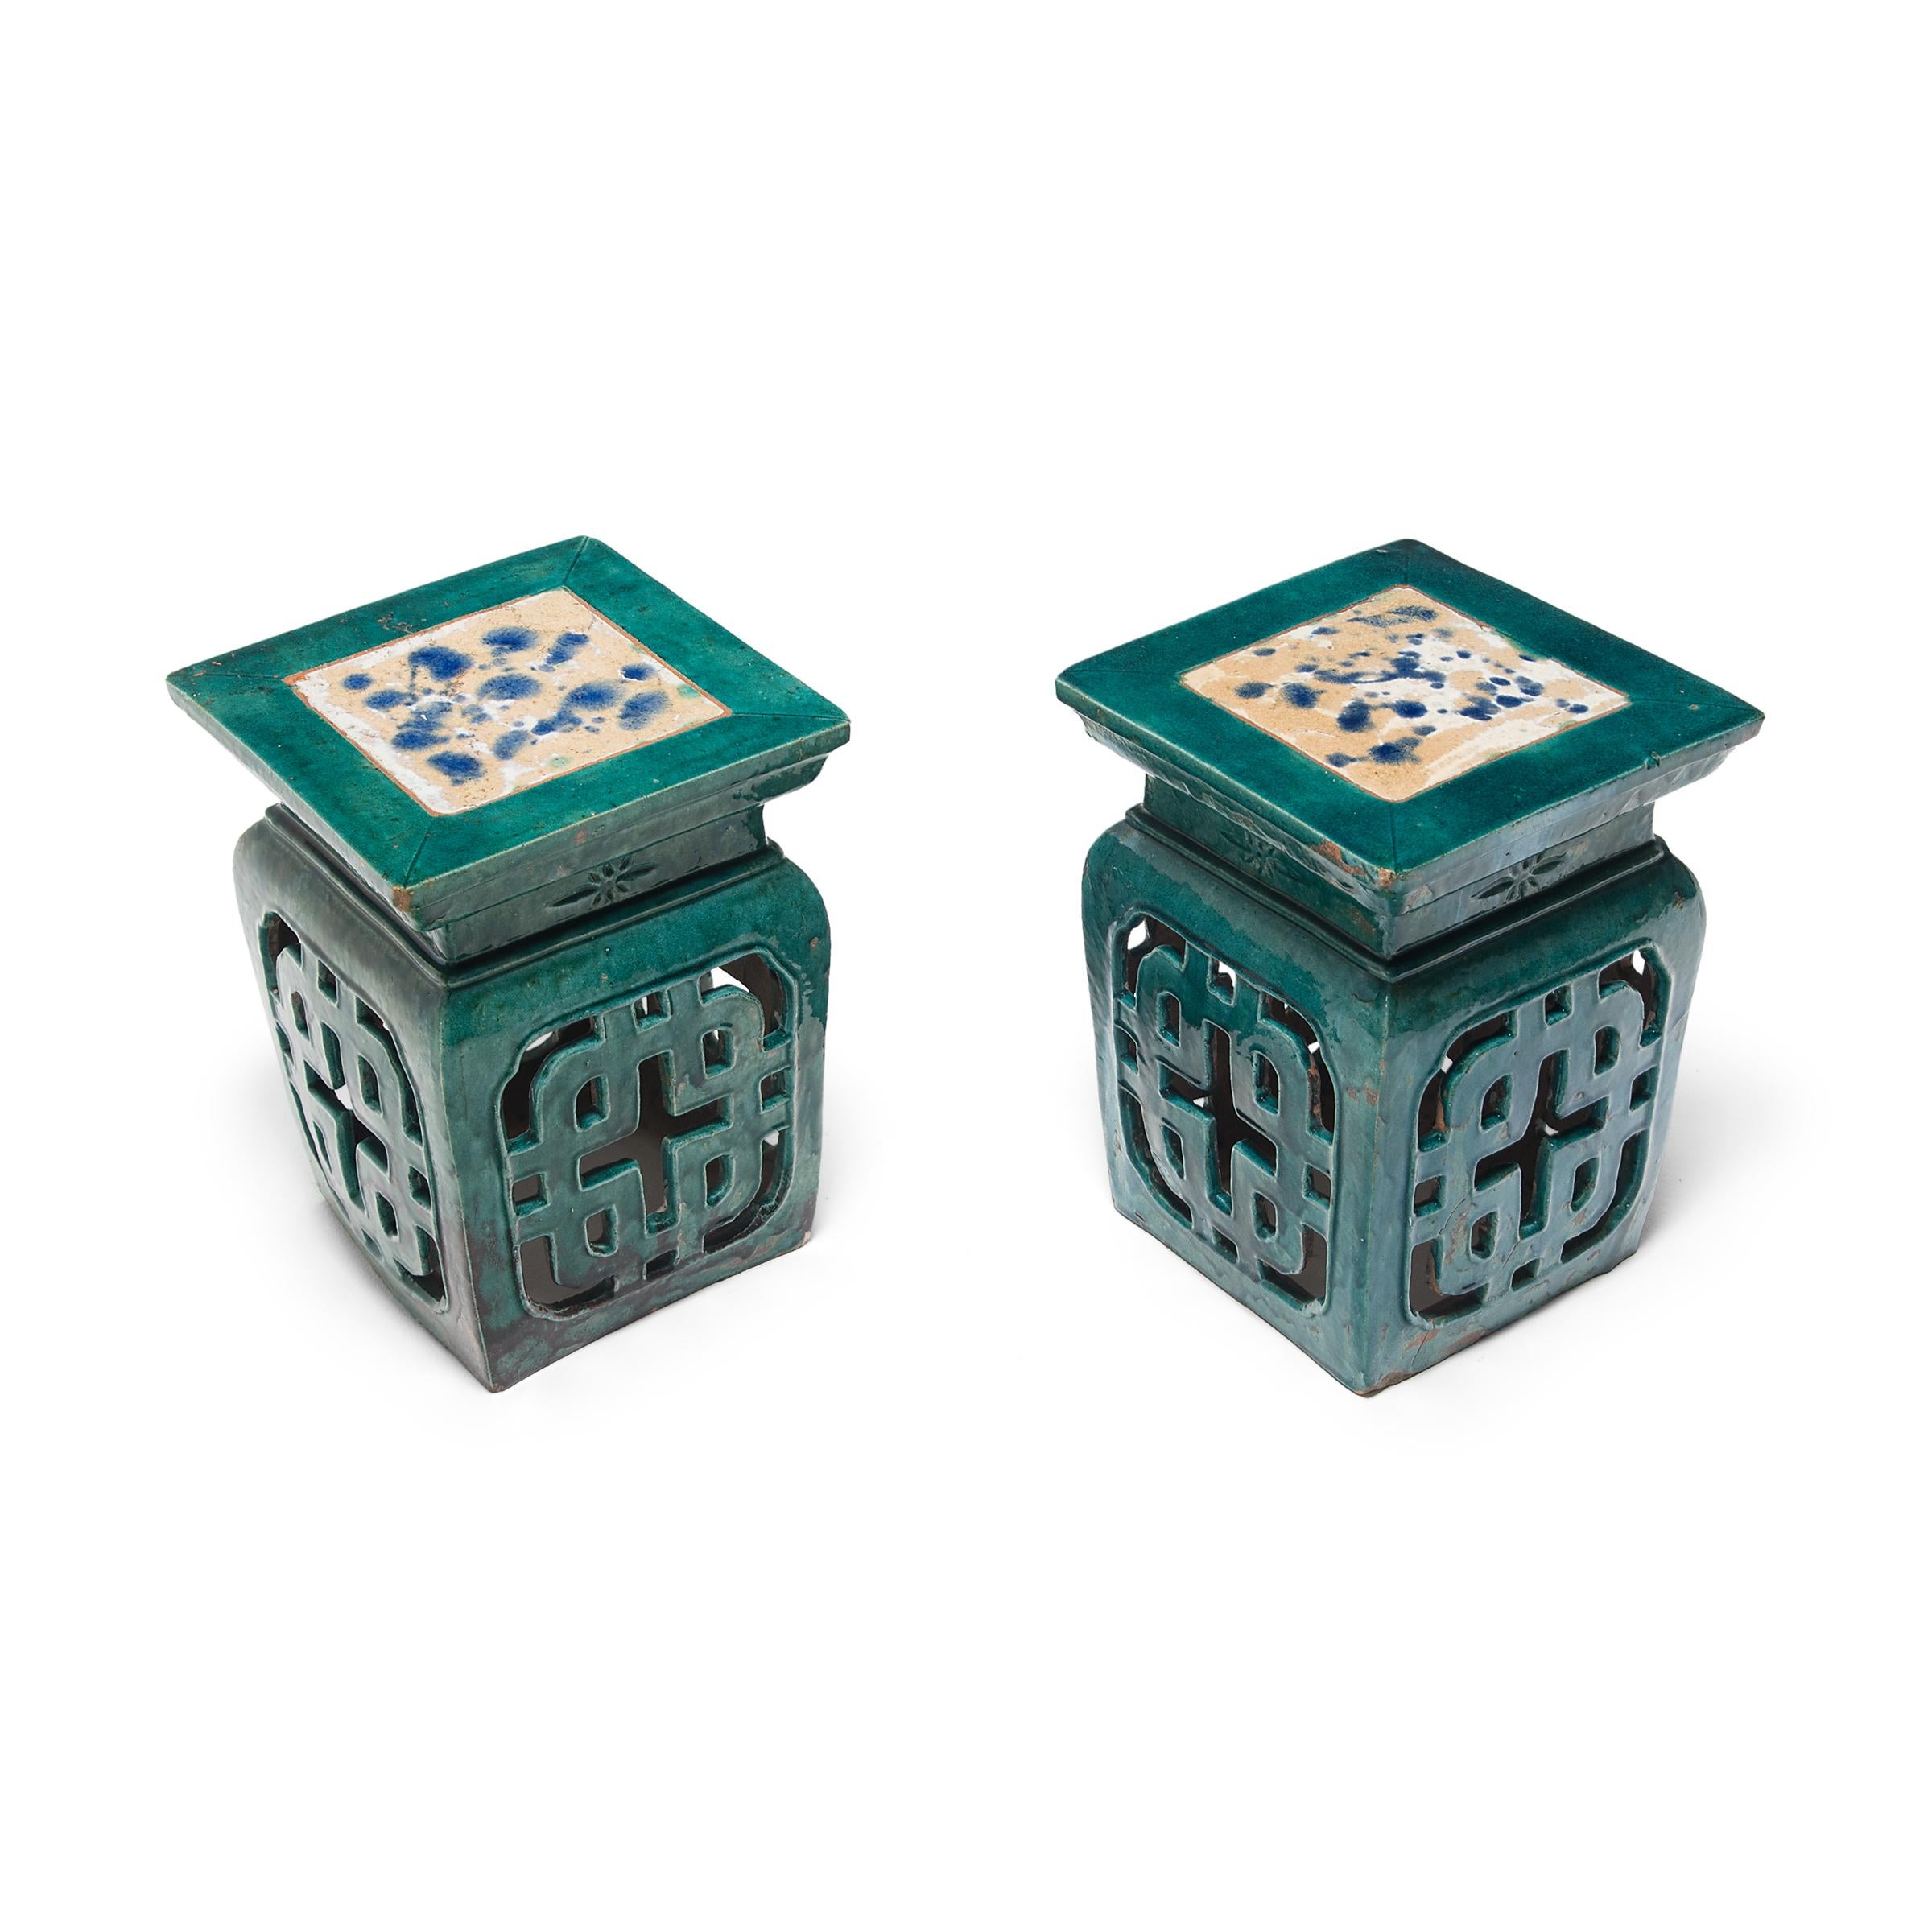 These early 20th century ceramic garden stools deviate from the traditional drum form with their angular shape and latticed sides. The stools instead borrow design elements from the Ming dynasty feng deng, a wooden stool featuring a square top and a